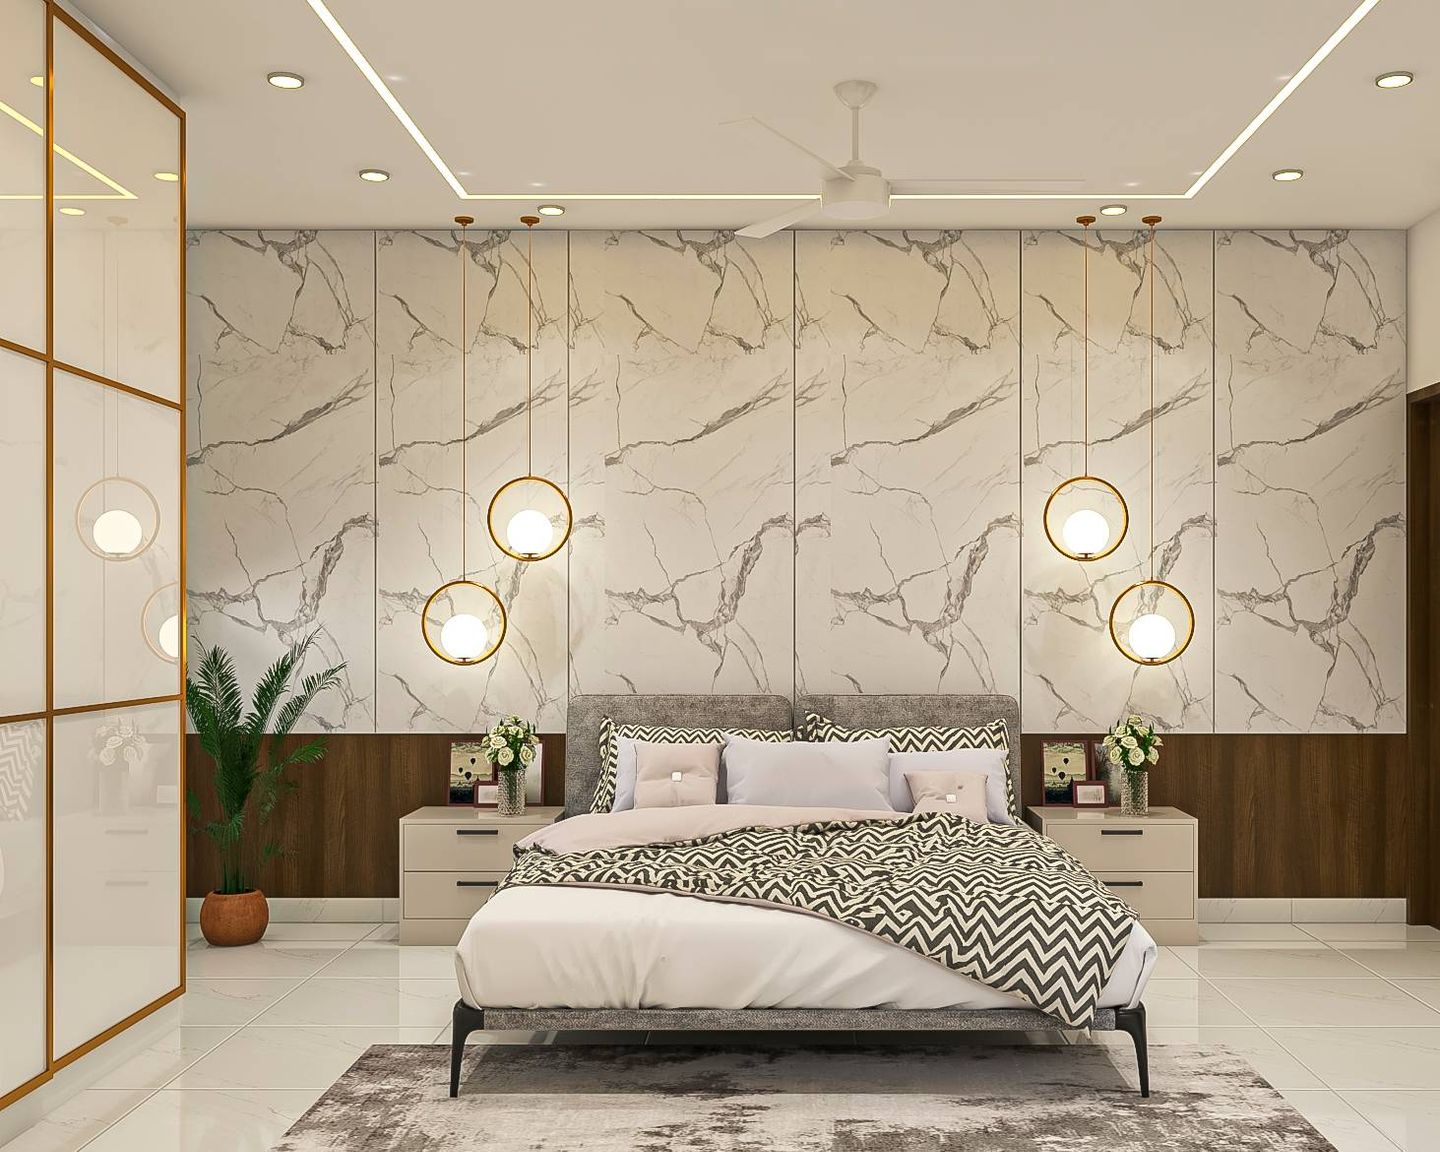 Bedroom Design With Marble And Wooden Wall - Livspace